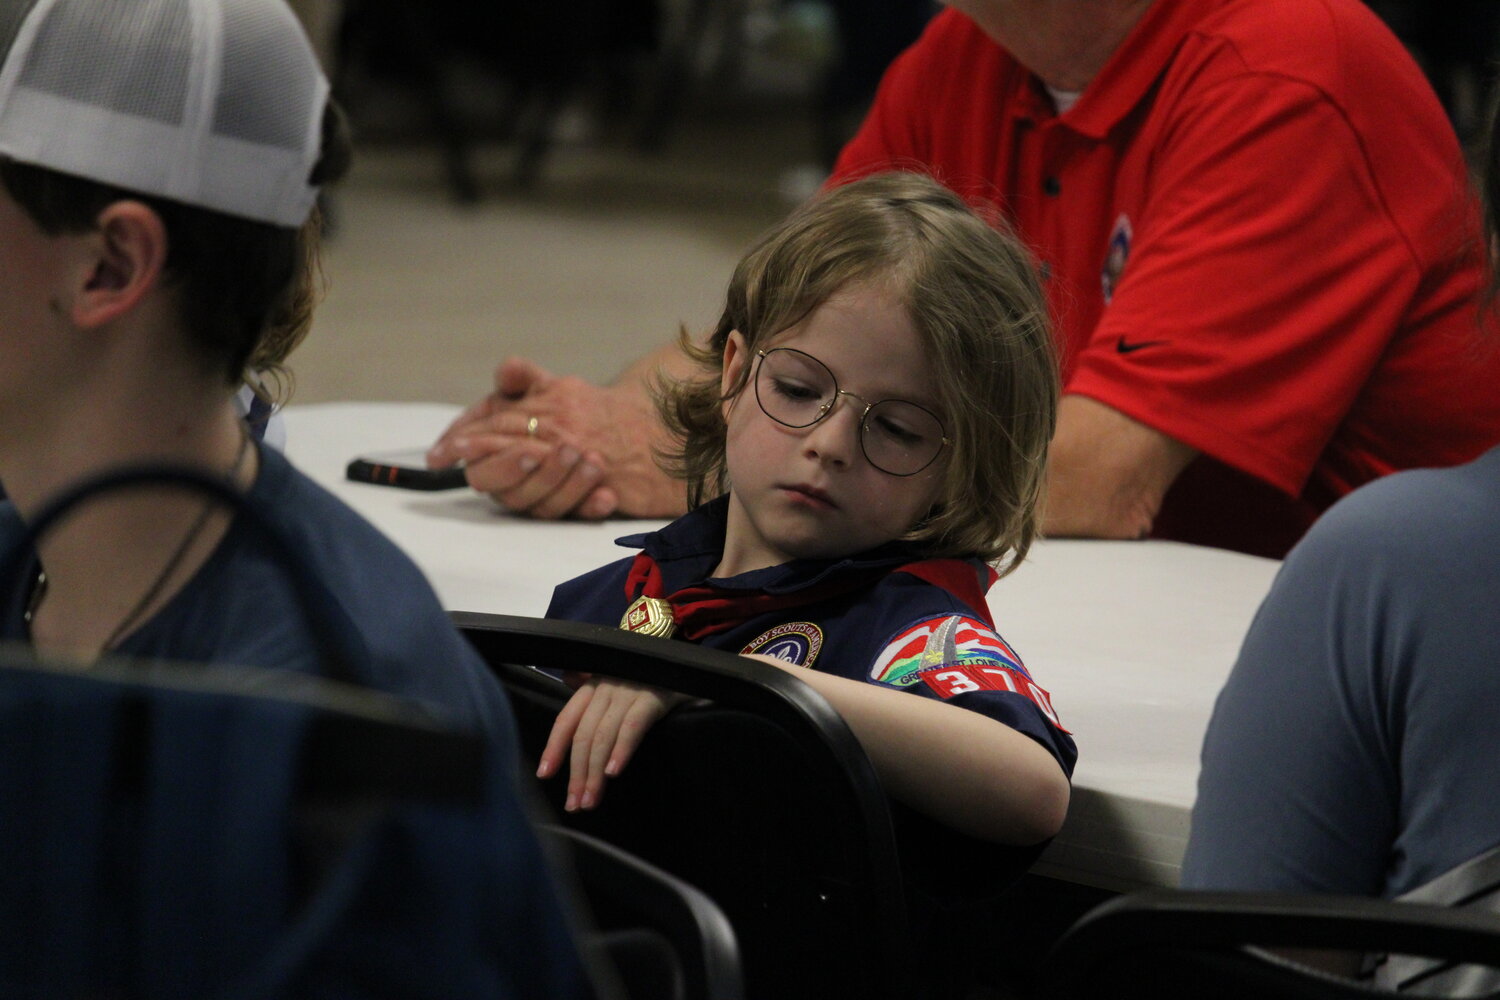 One of the Cub Scouts who helped lead the Pledge of Allegiance pays attention during the ceremony.